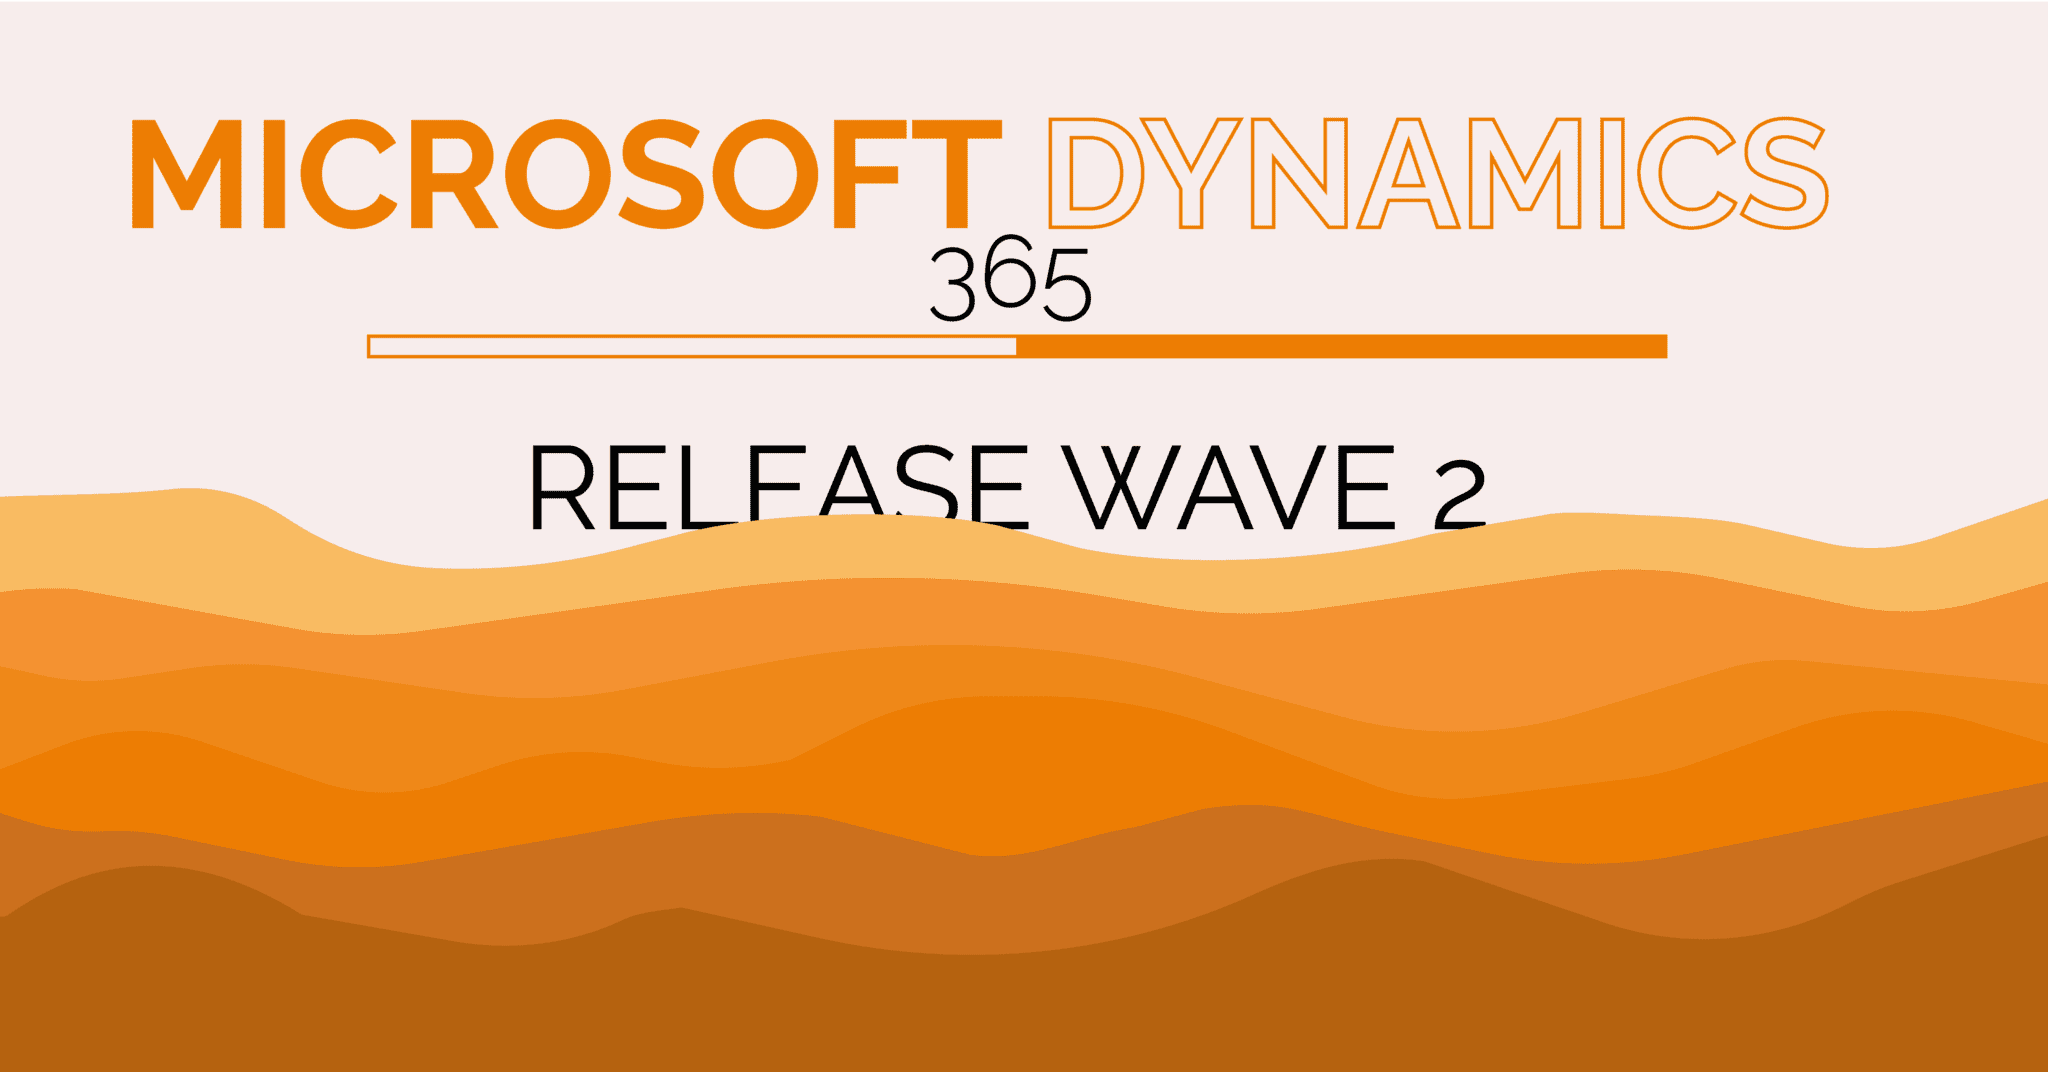 Microsoft Dynamics 365 Release Wave 2 2020 The Highlights